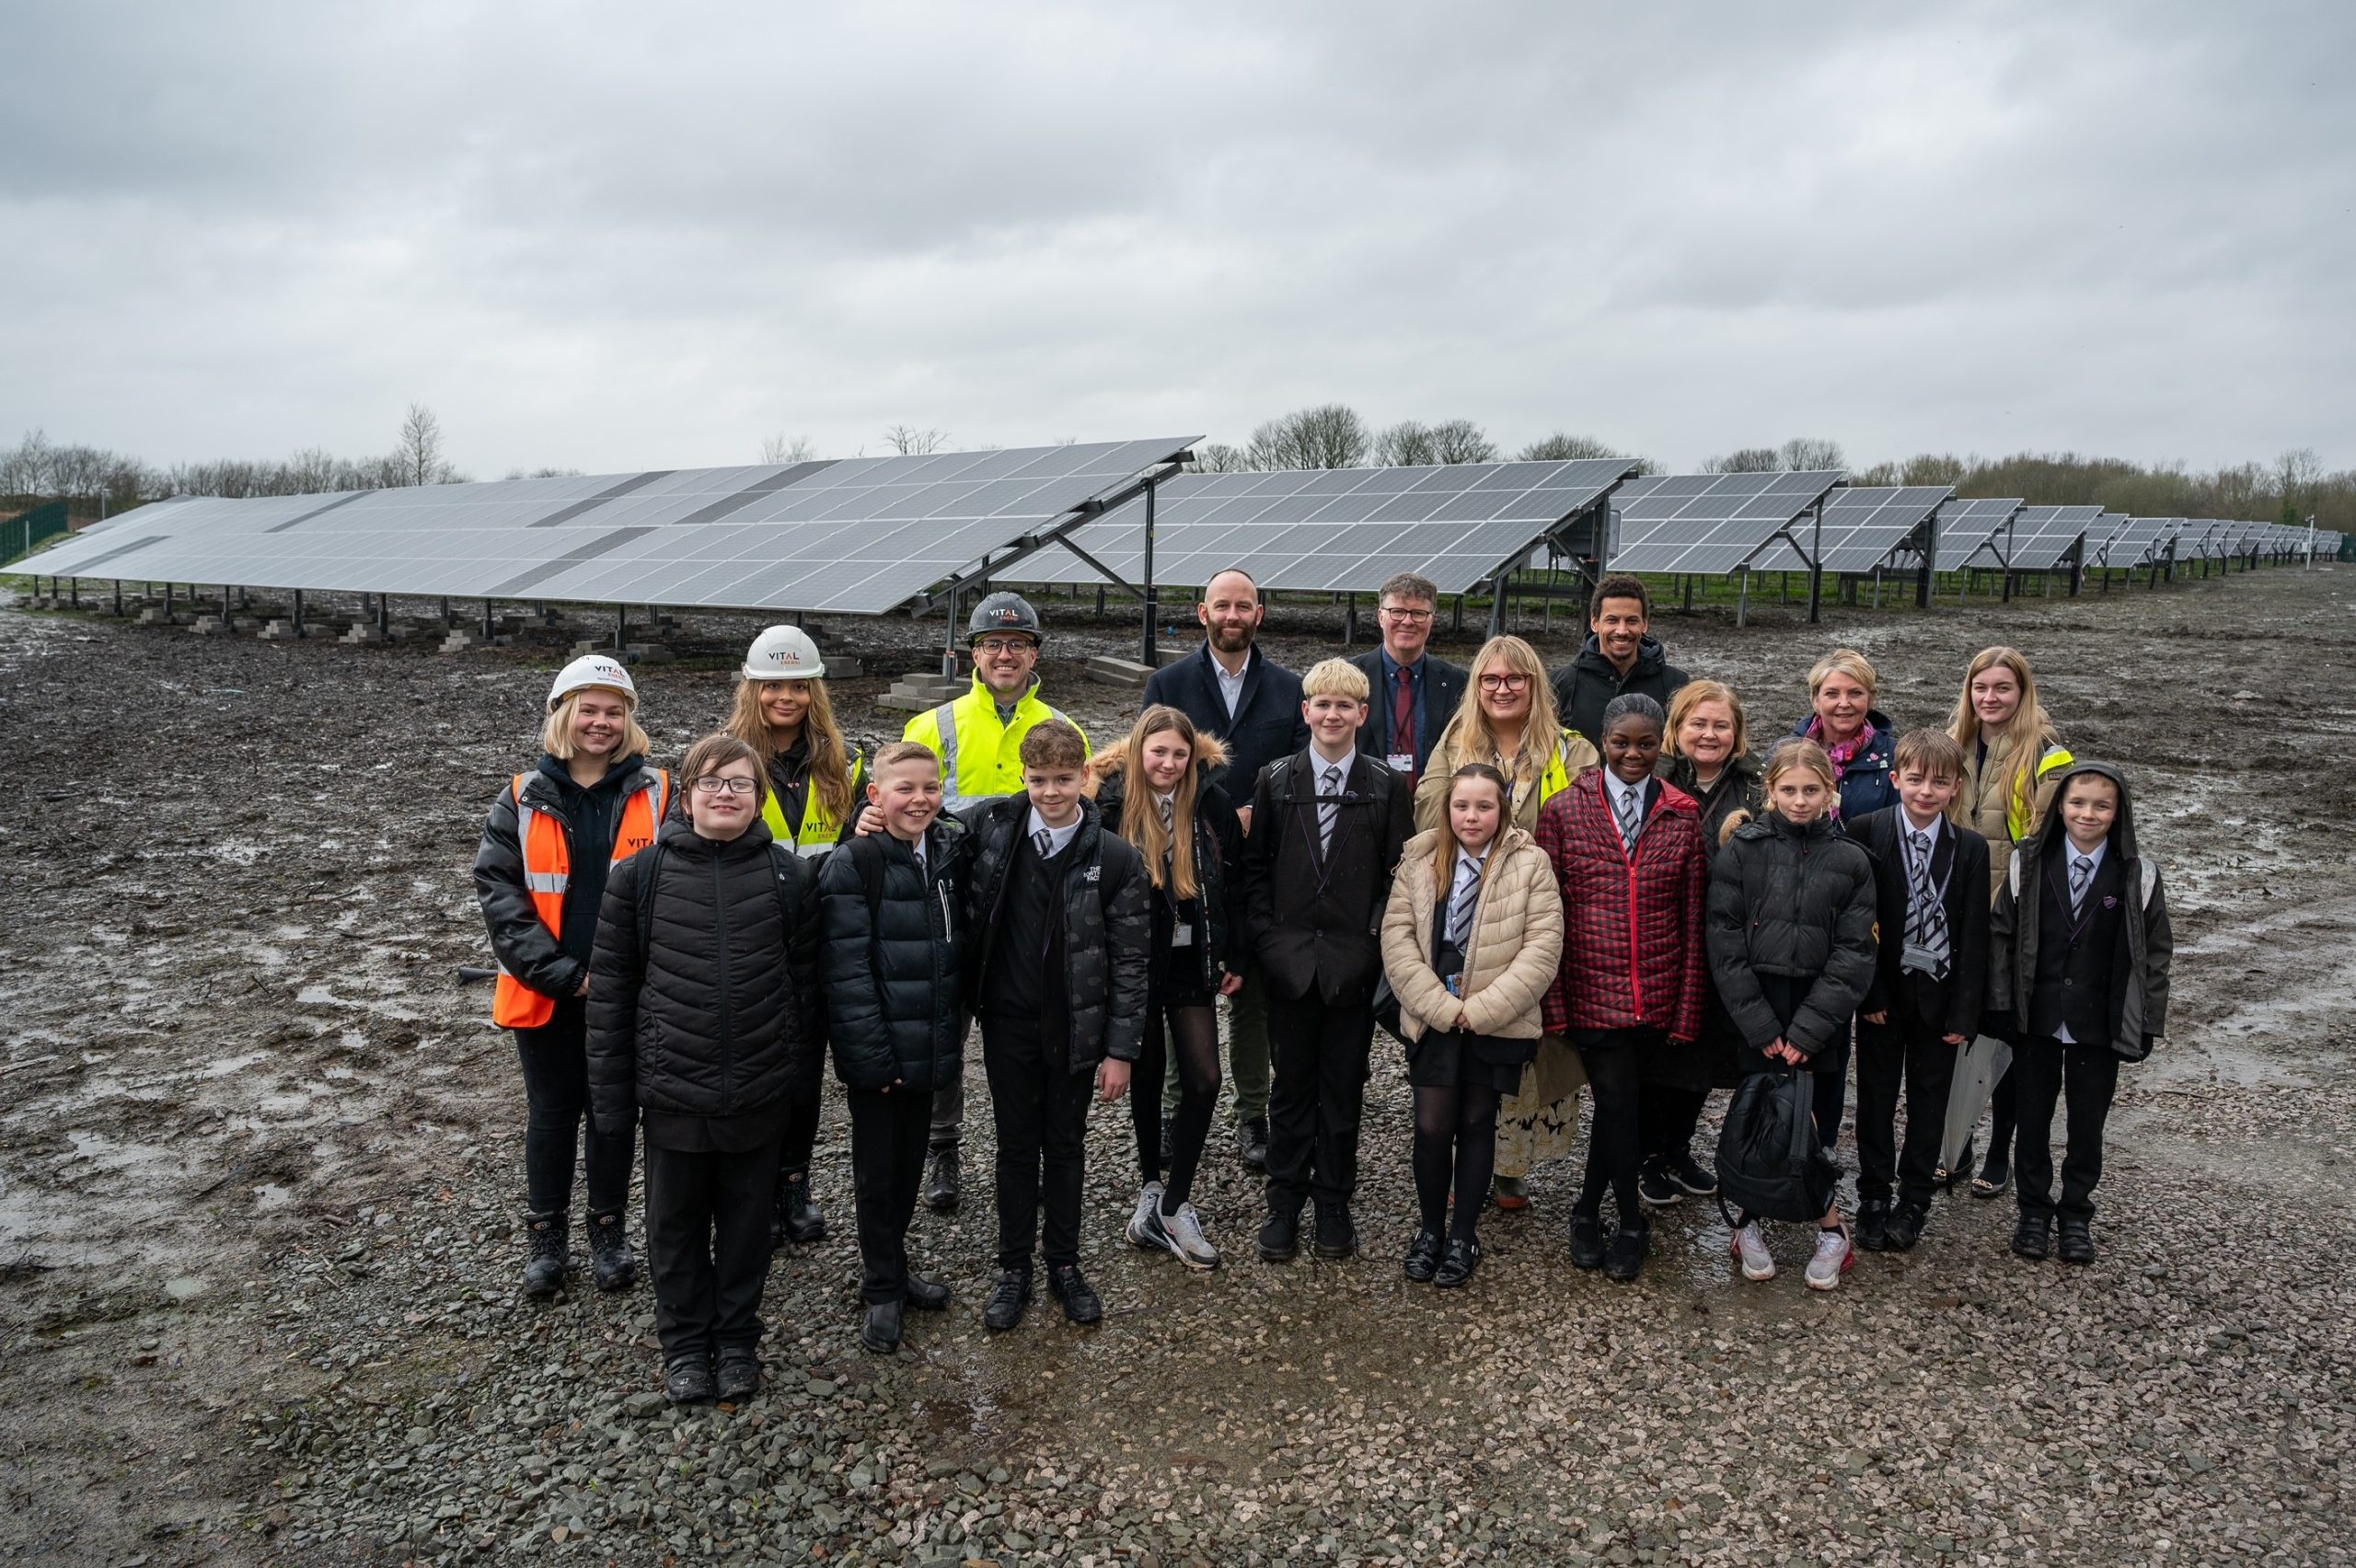 Salford's first solar farm completed in Little Hulton